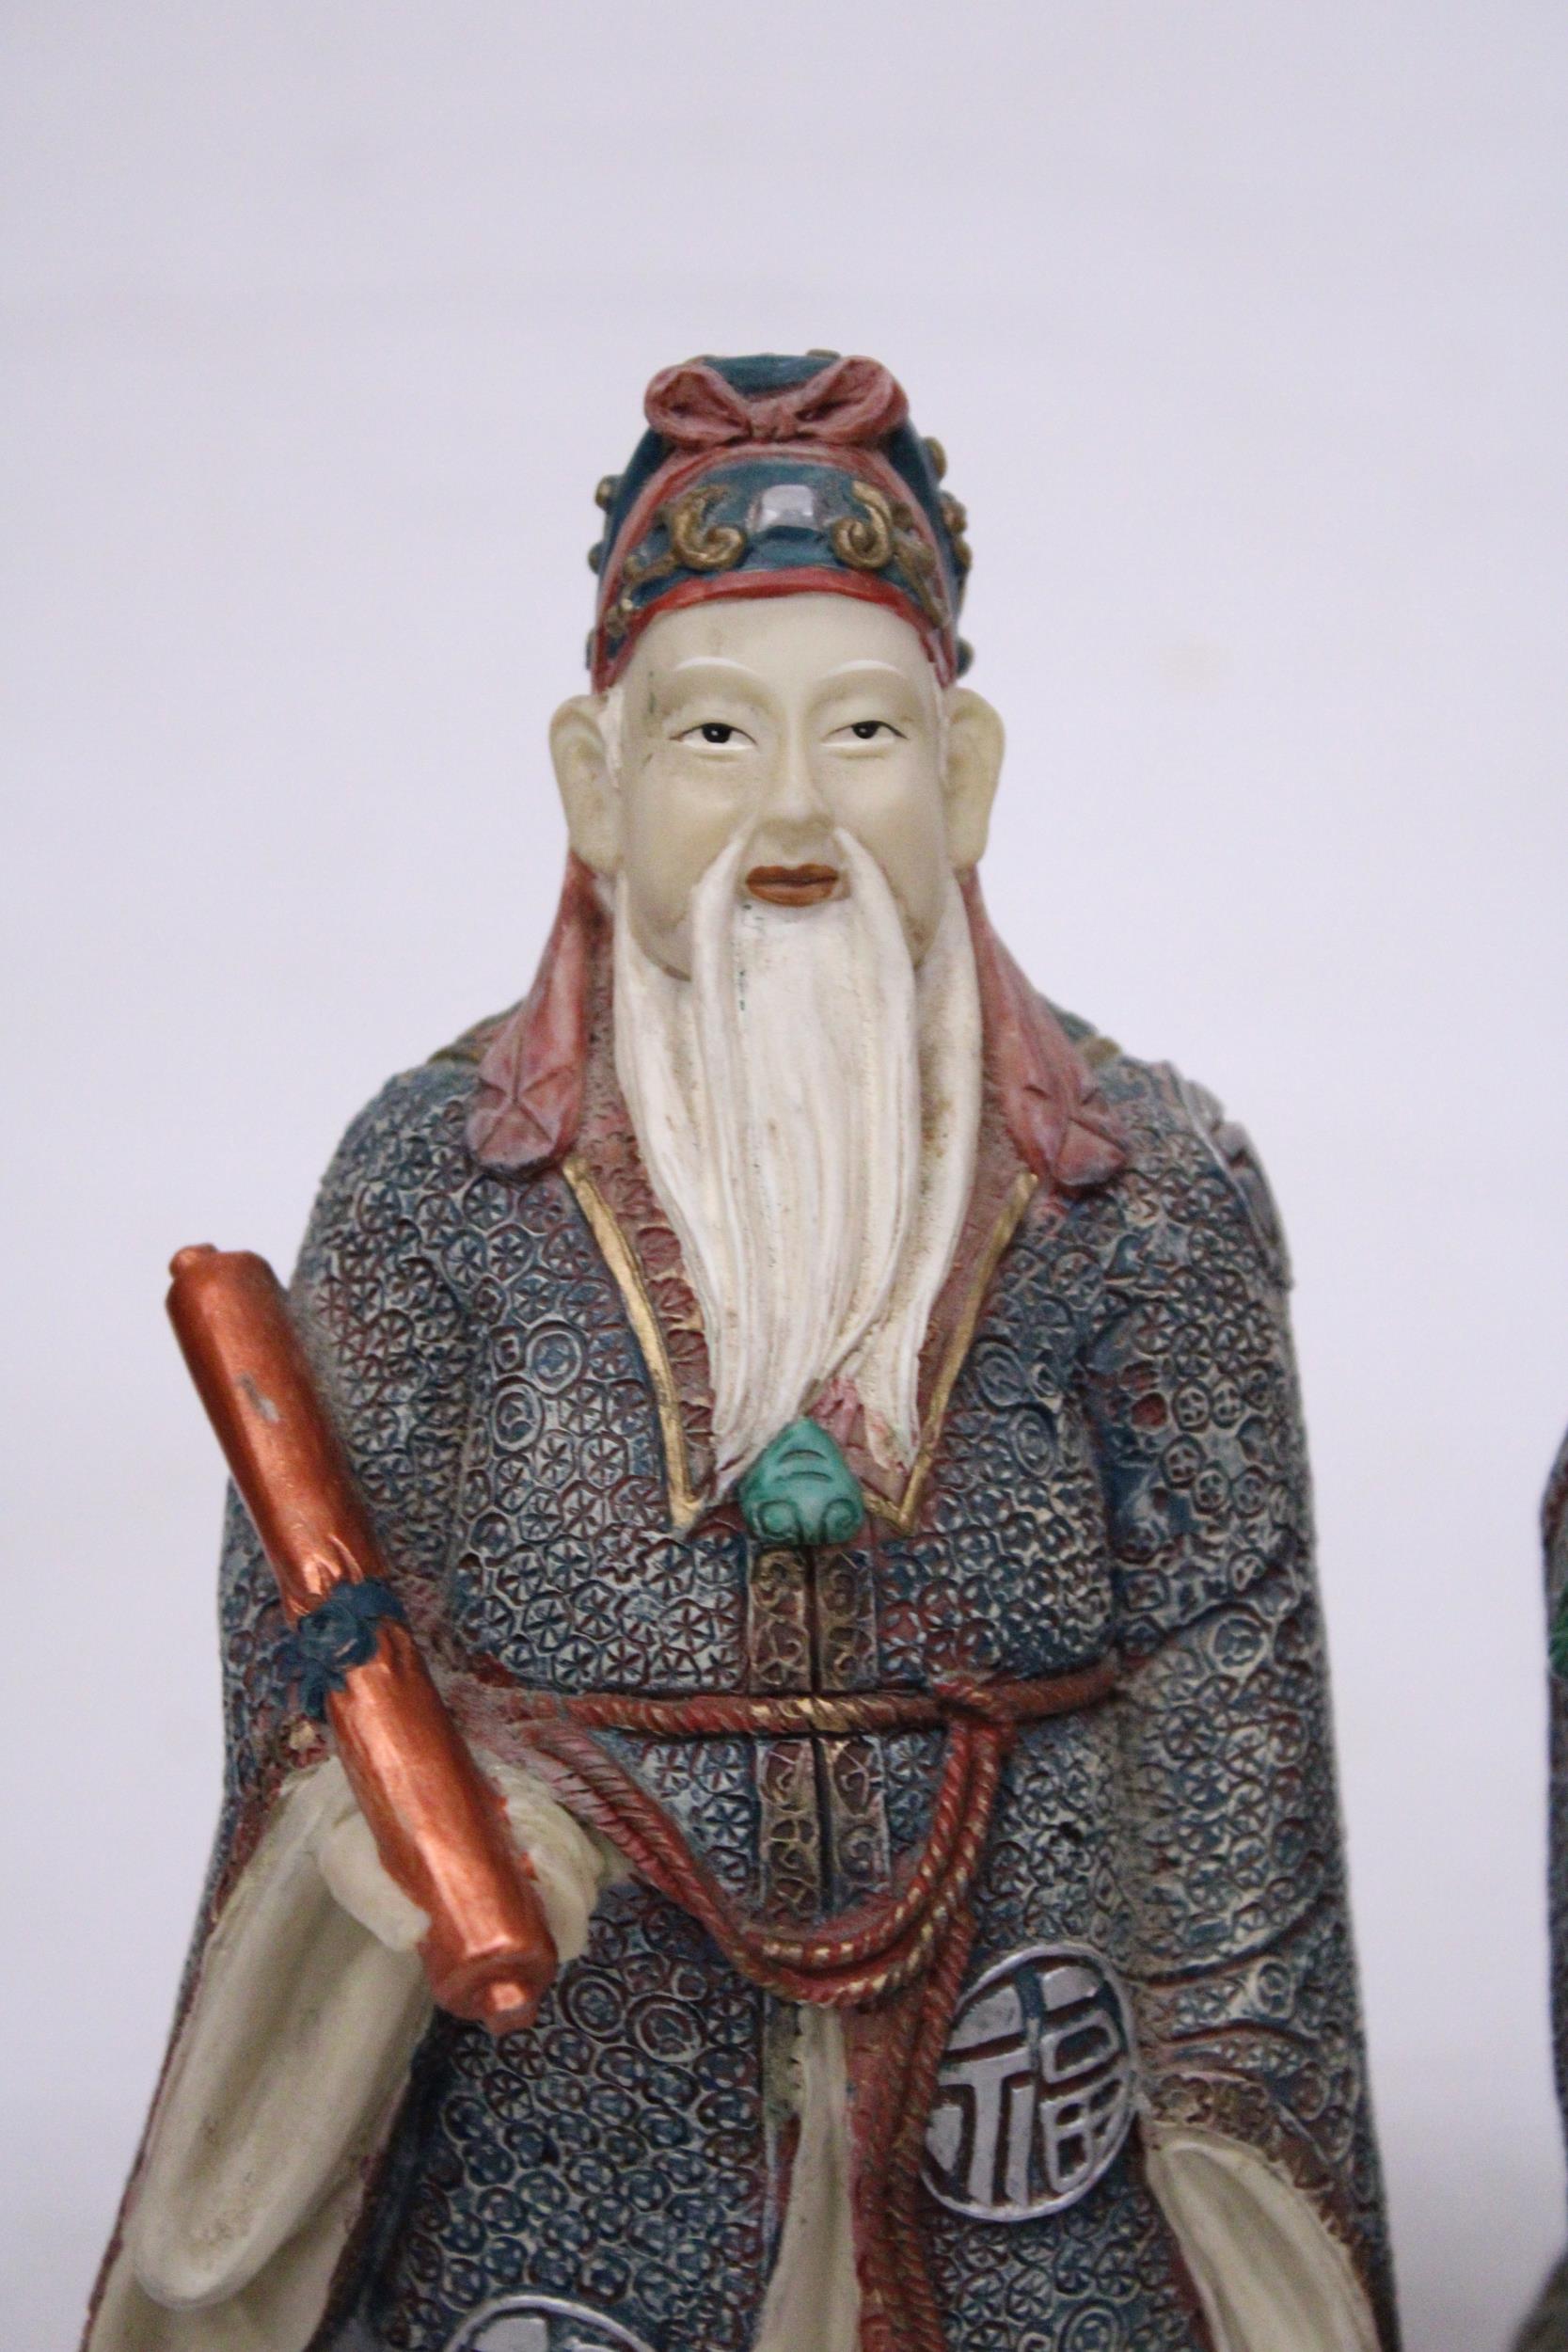 TWO HEAVY STONE MANDARIN FIGURES - 7 INCH (H) - Image 5 of 6